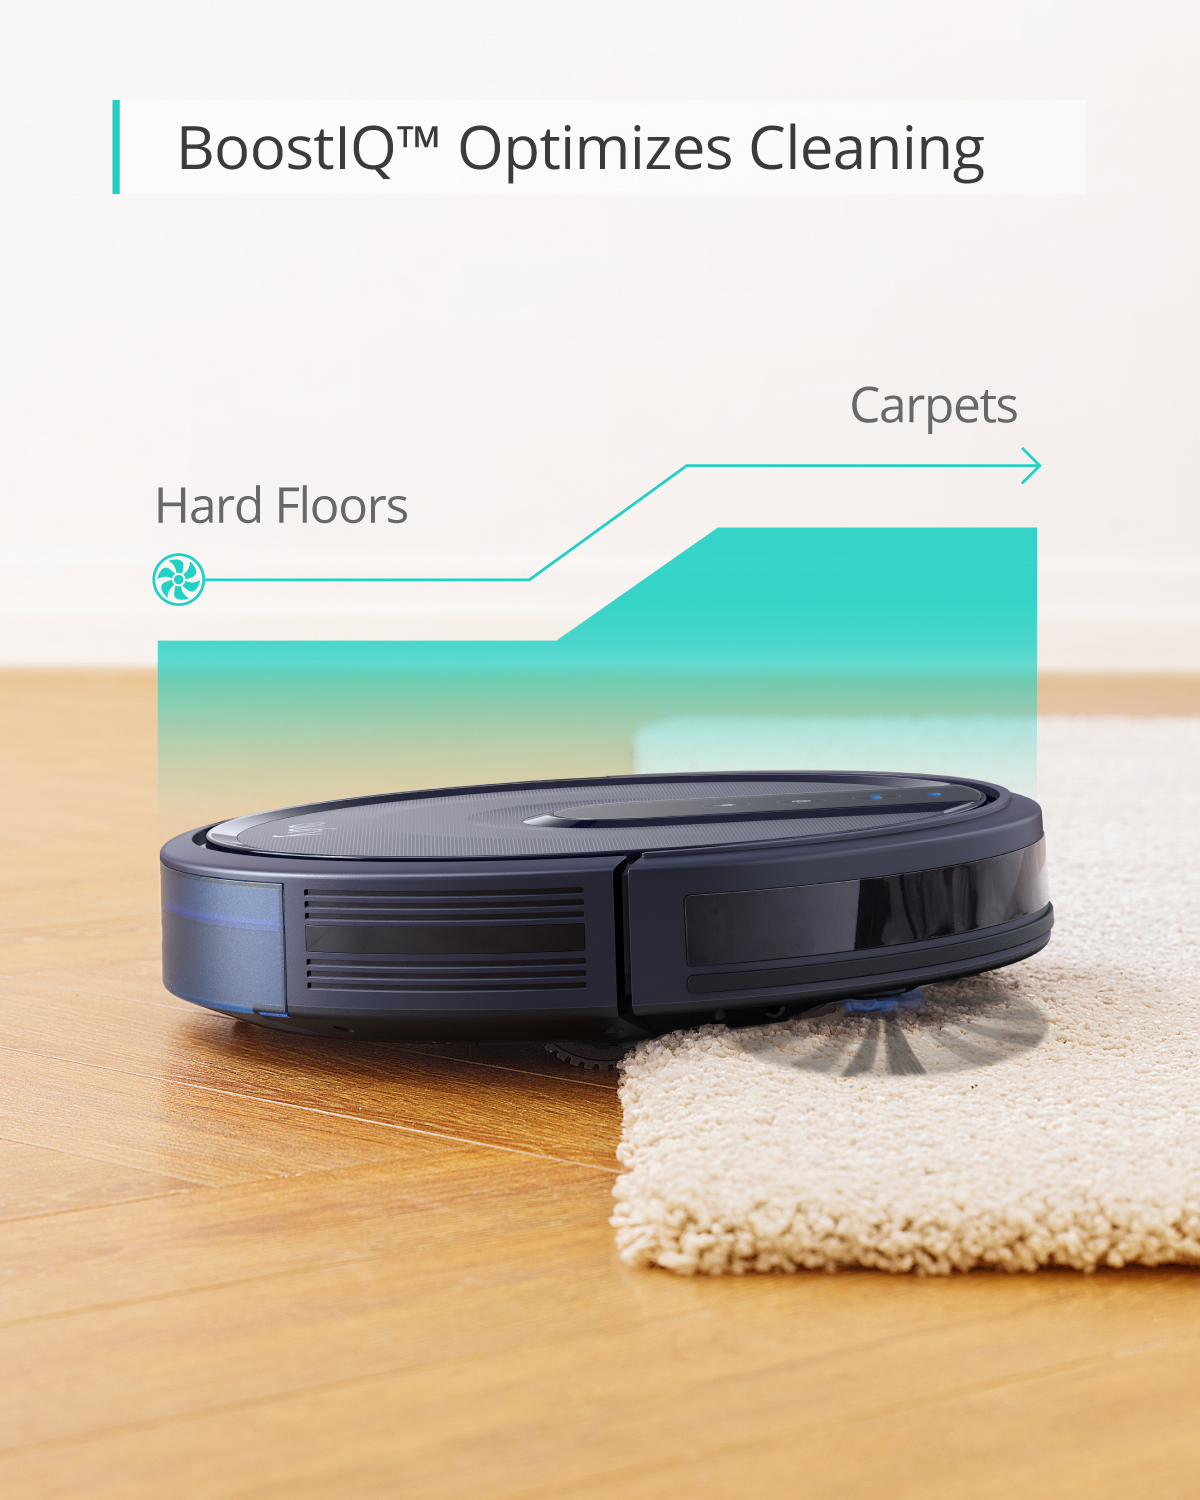 Anker eufy 25C Wi-Fi Connected Robot Vacuum, Great for Picking up Pet Hairs, Quiet, Slim - image 7 of 10